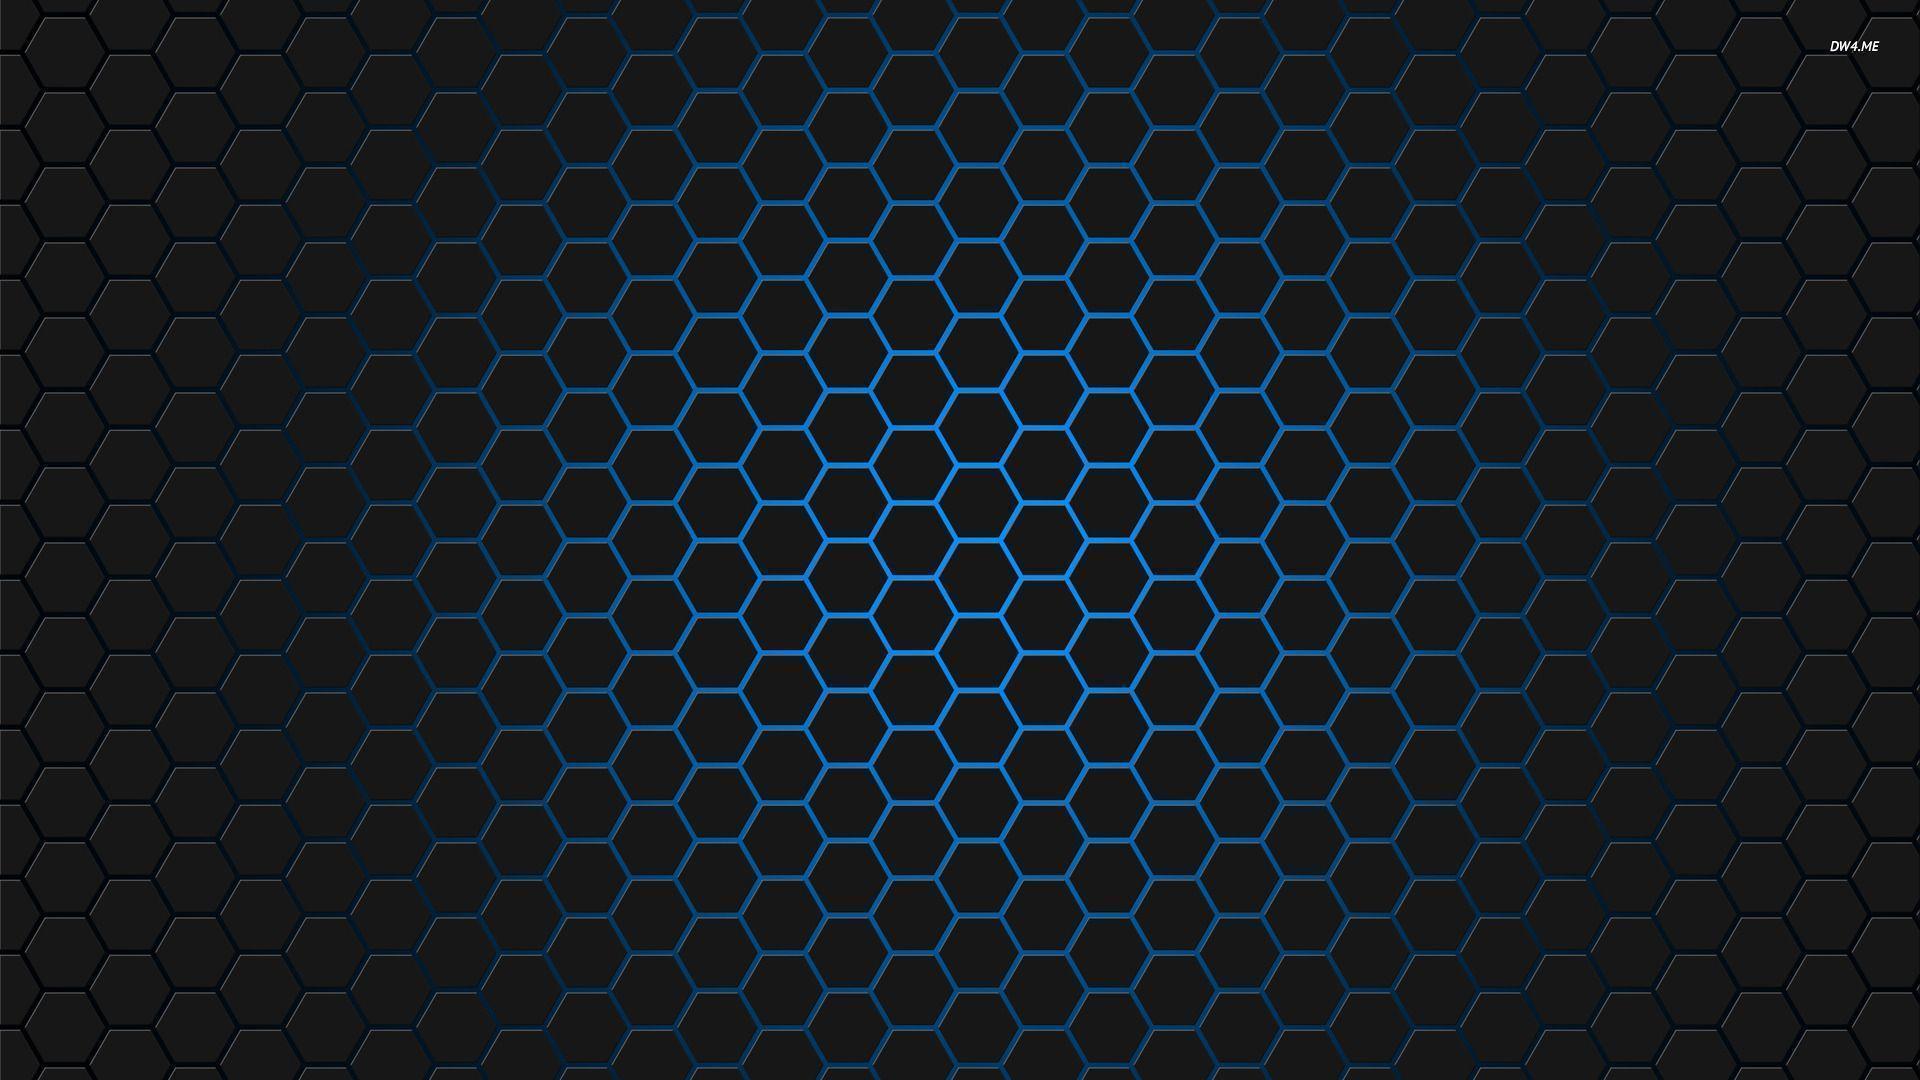 Hexagon Wallpaper, Awesome Hexagon Picture and Wallpaper